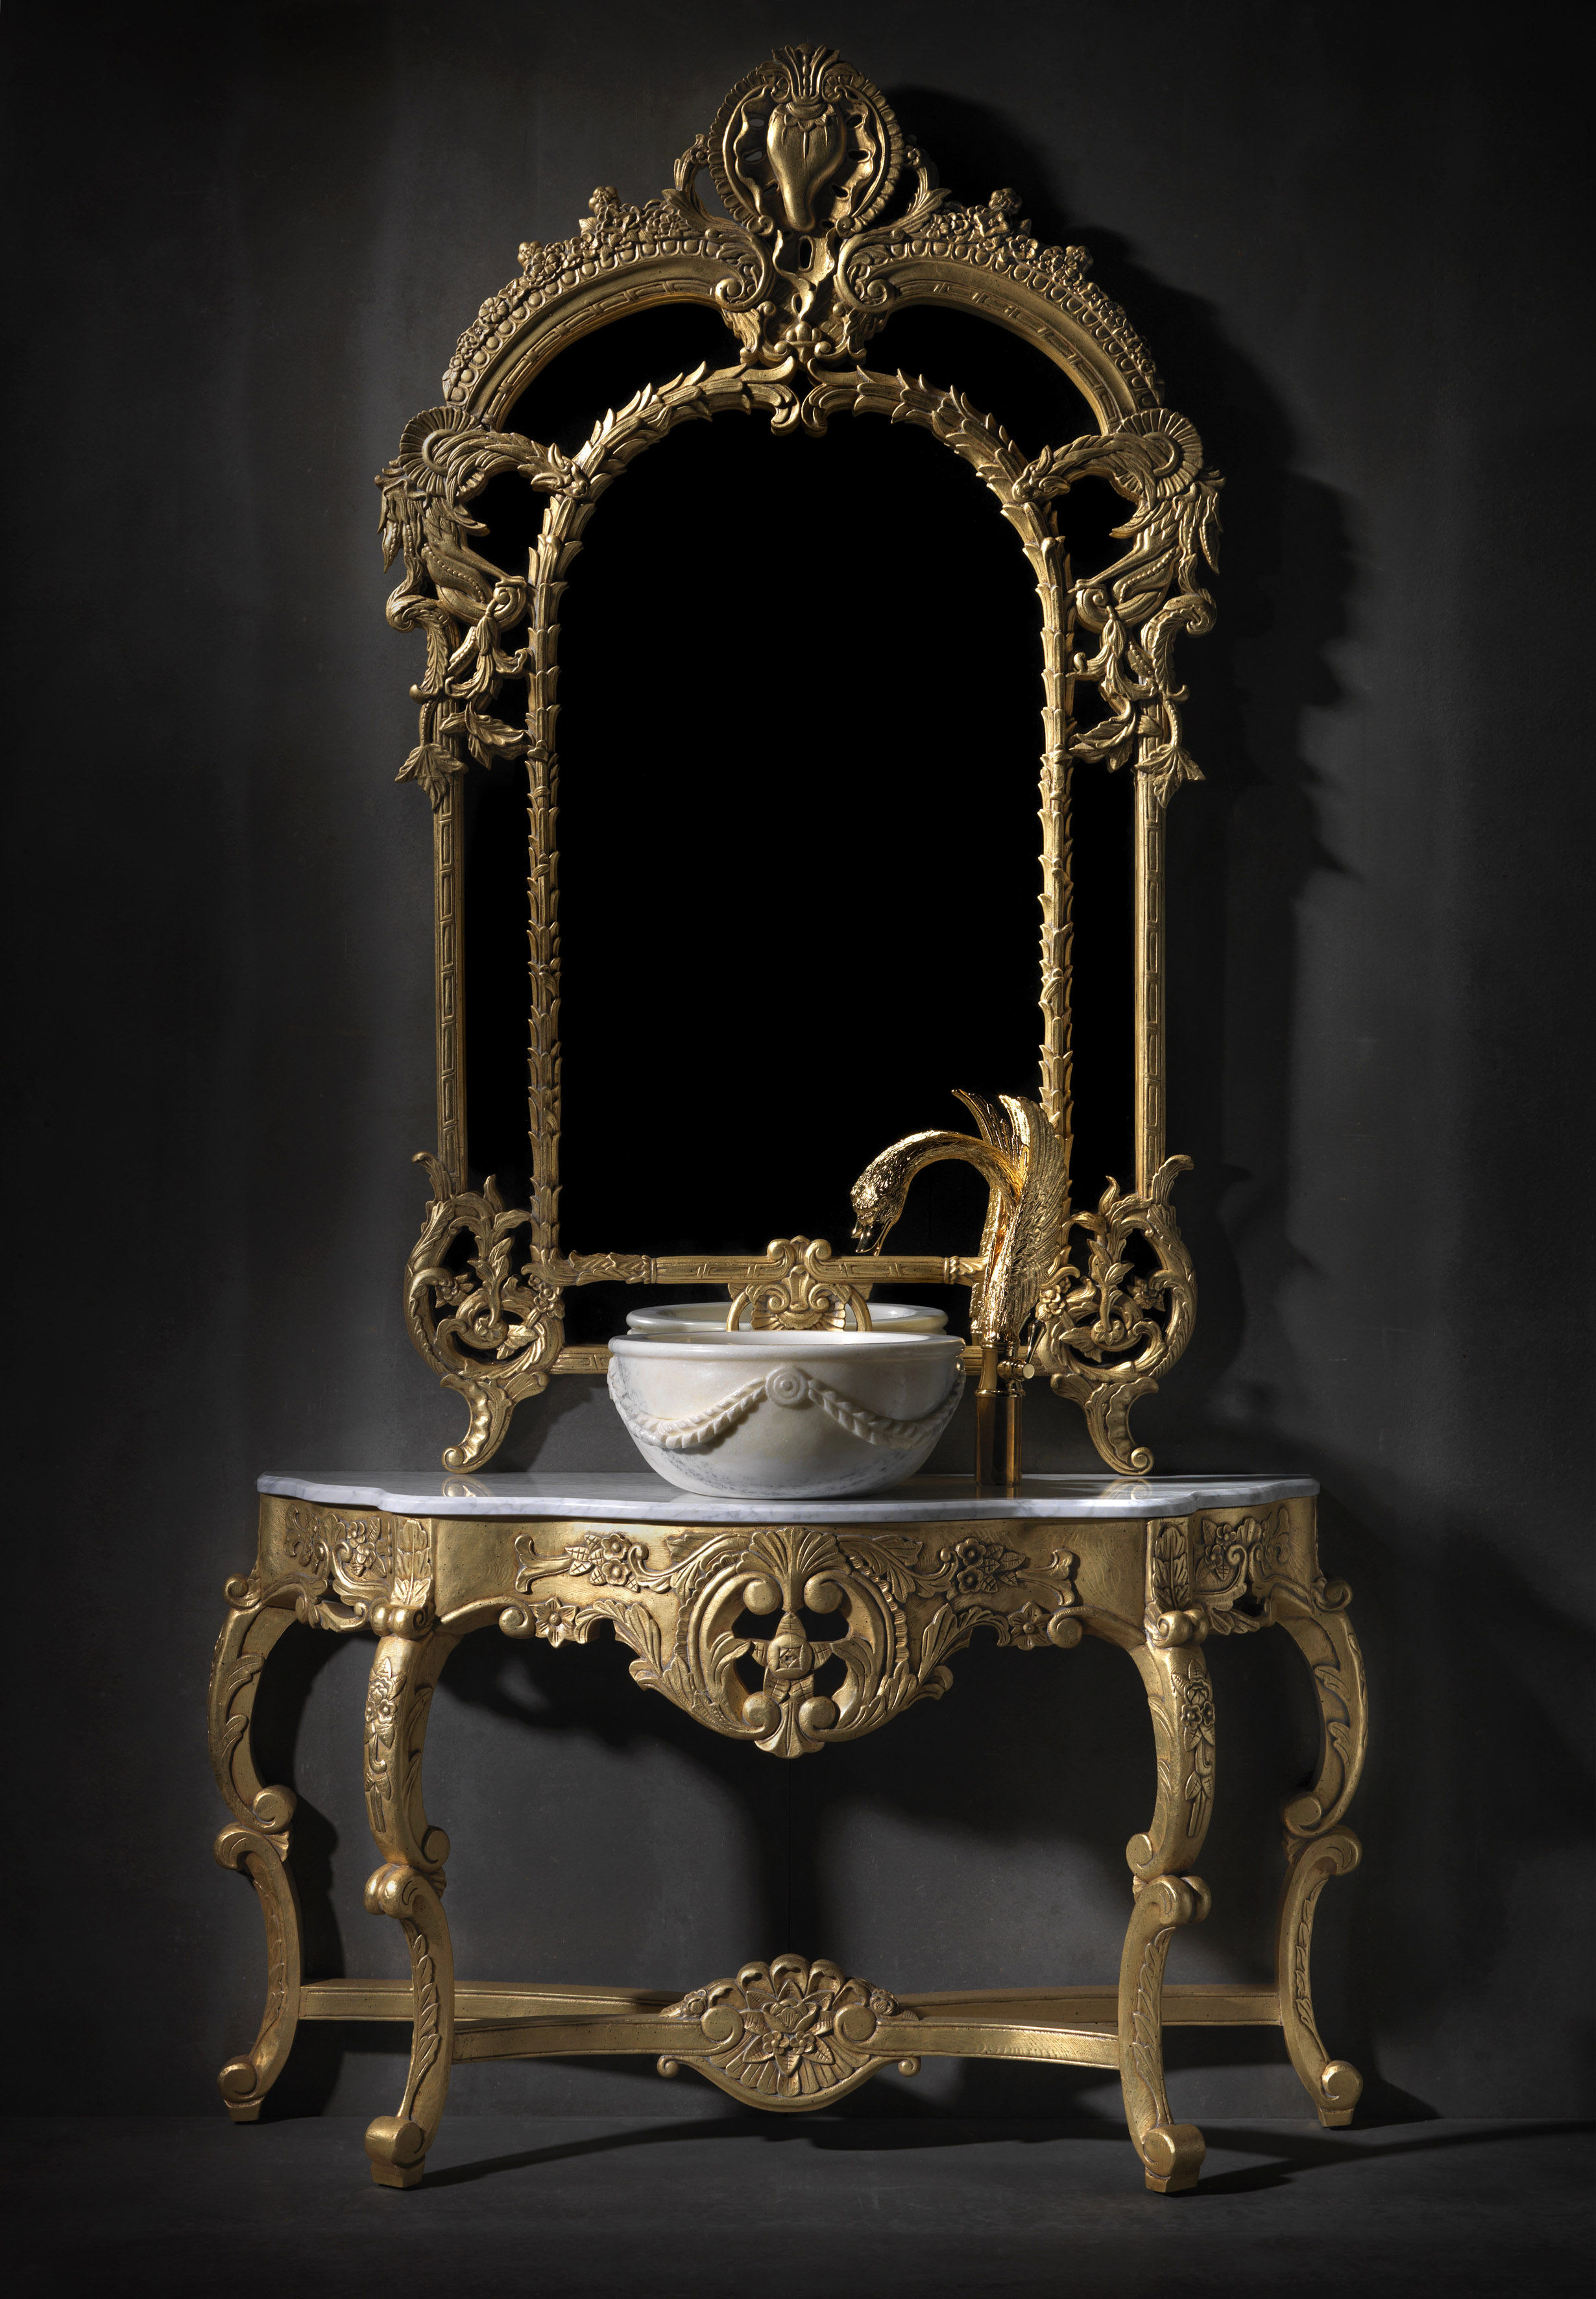 An opulent, handcrafted bathroom accessories by Bronces Mestre